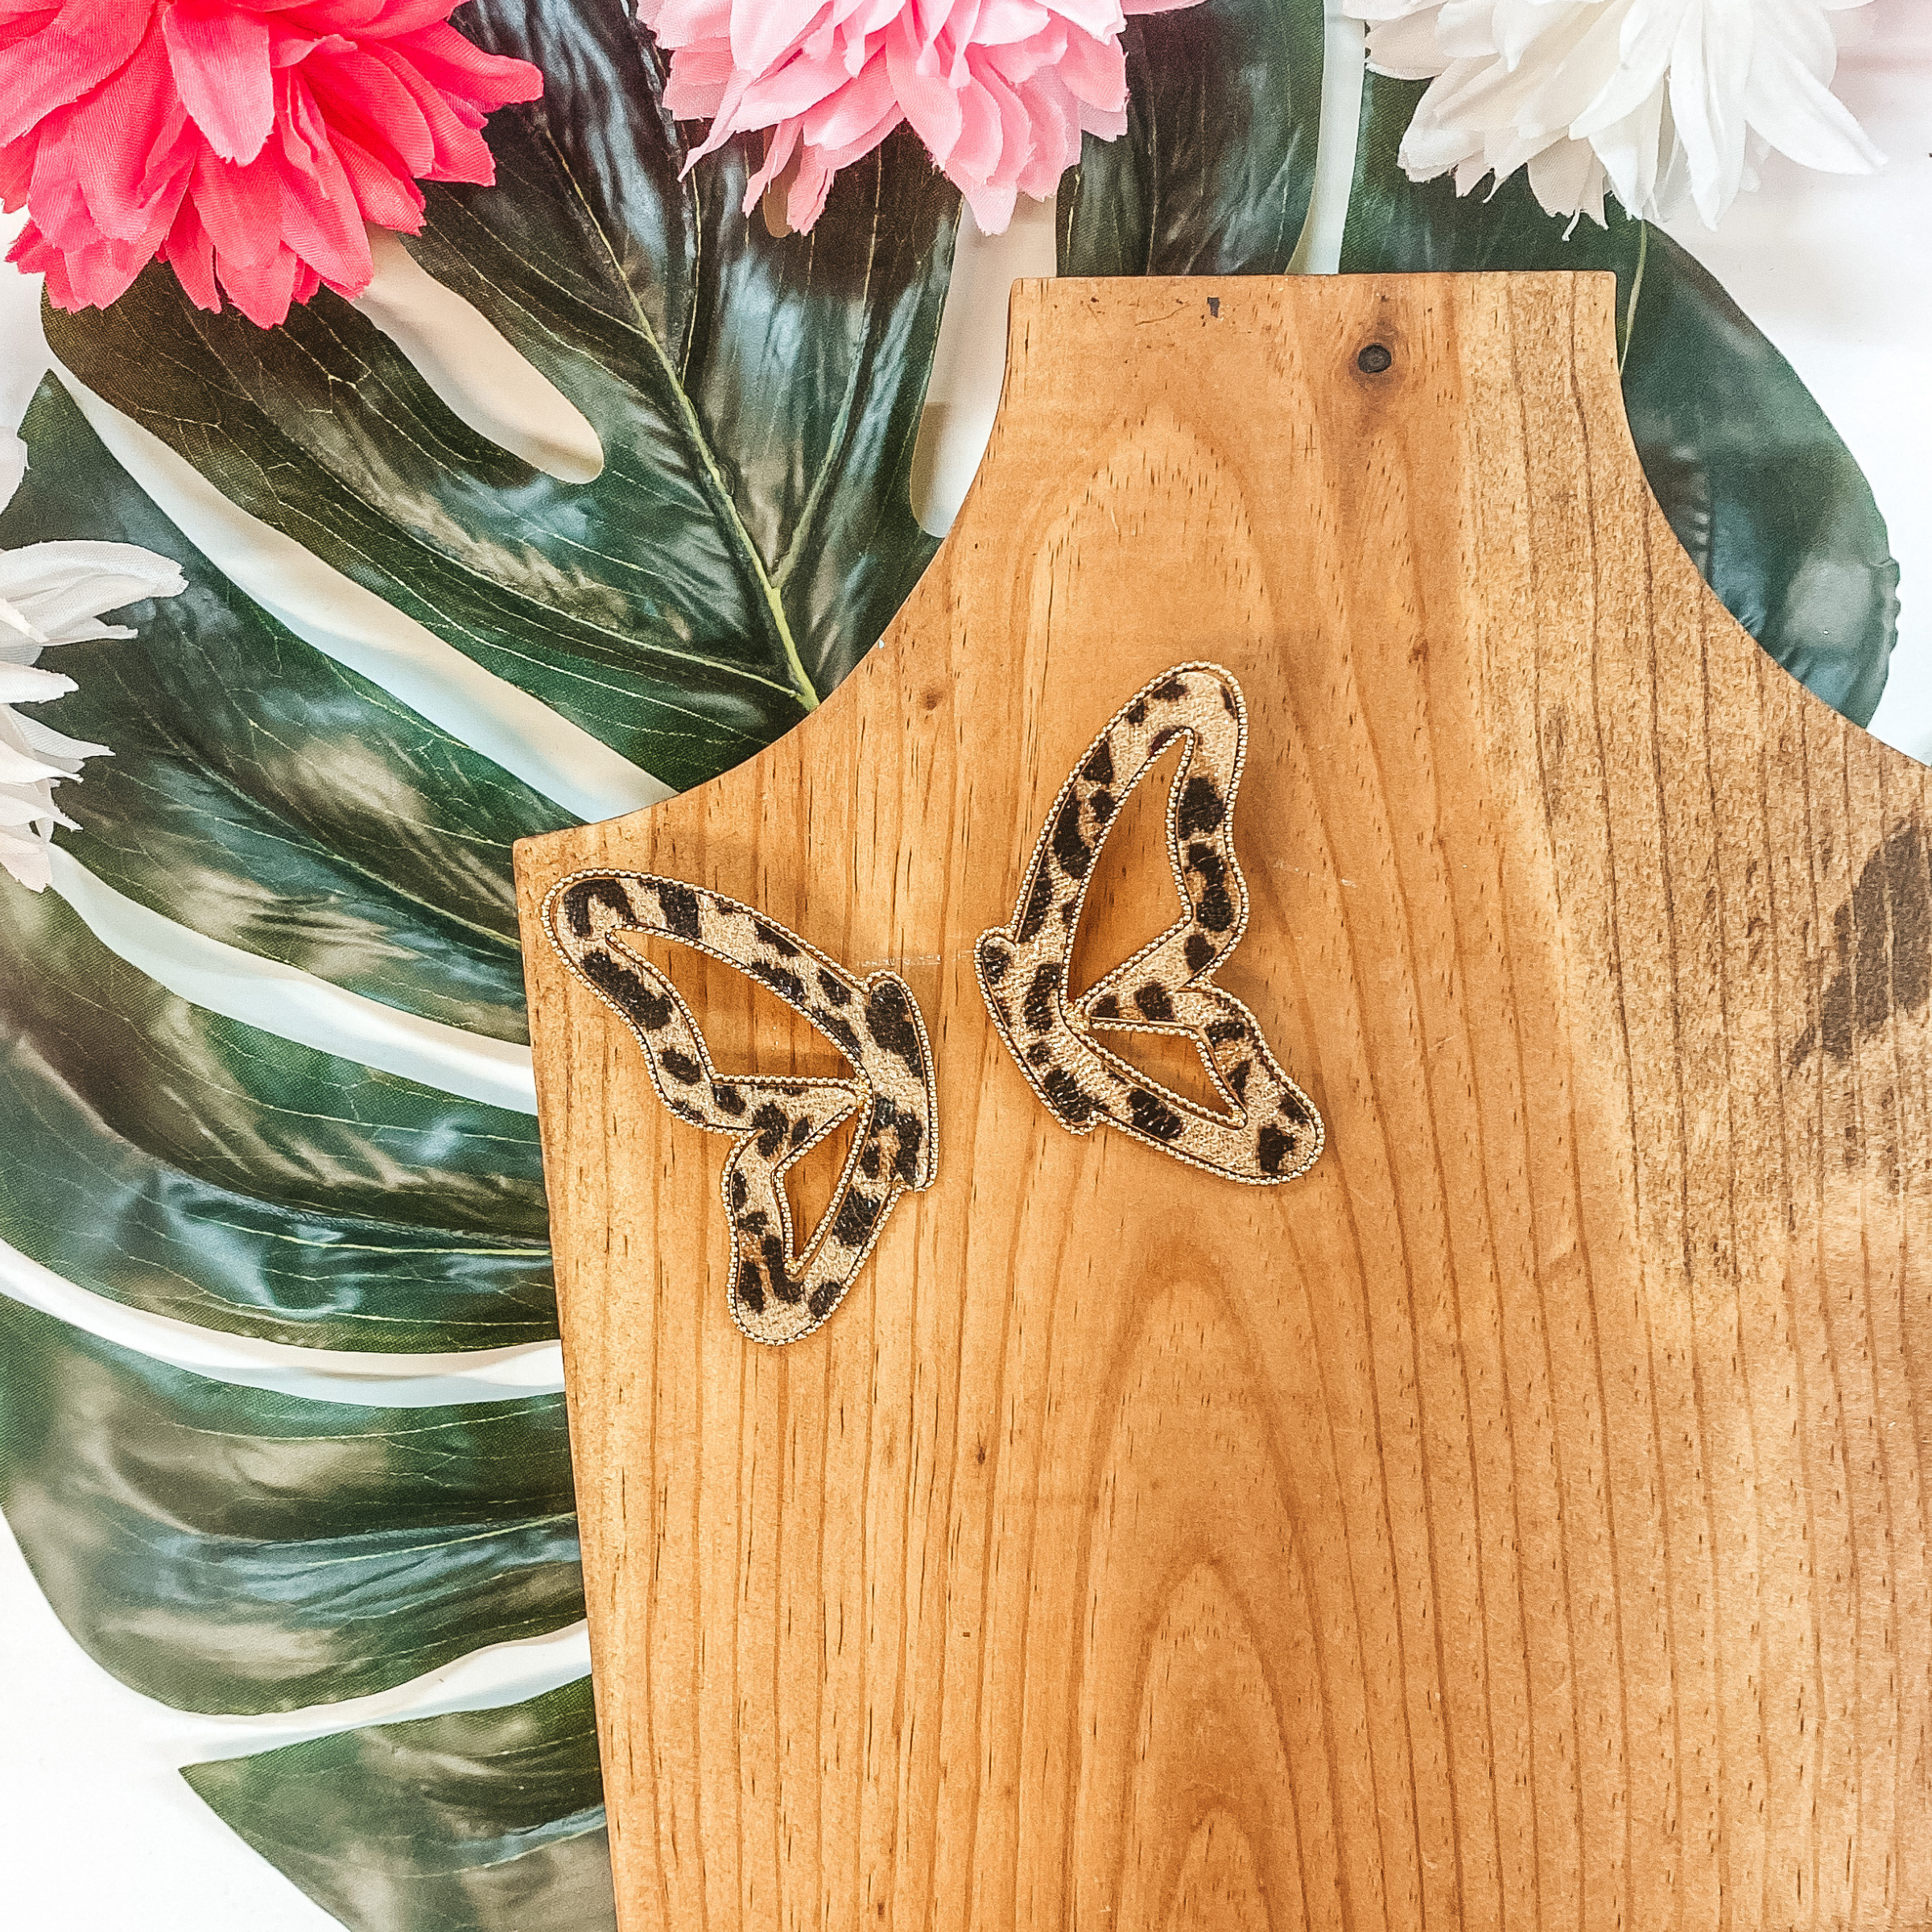 Butterfly Kisses Leather Butterfly Earrings with Gold Trim in Leopard Print - Giddy Up Glamour Boutique